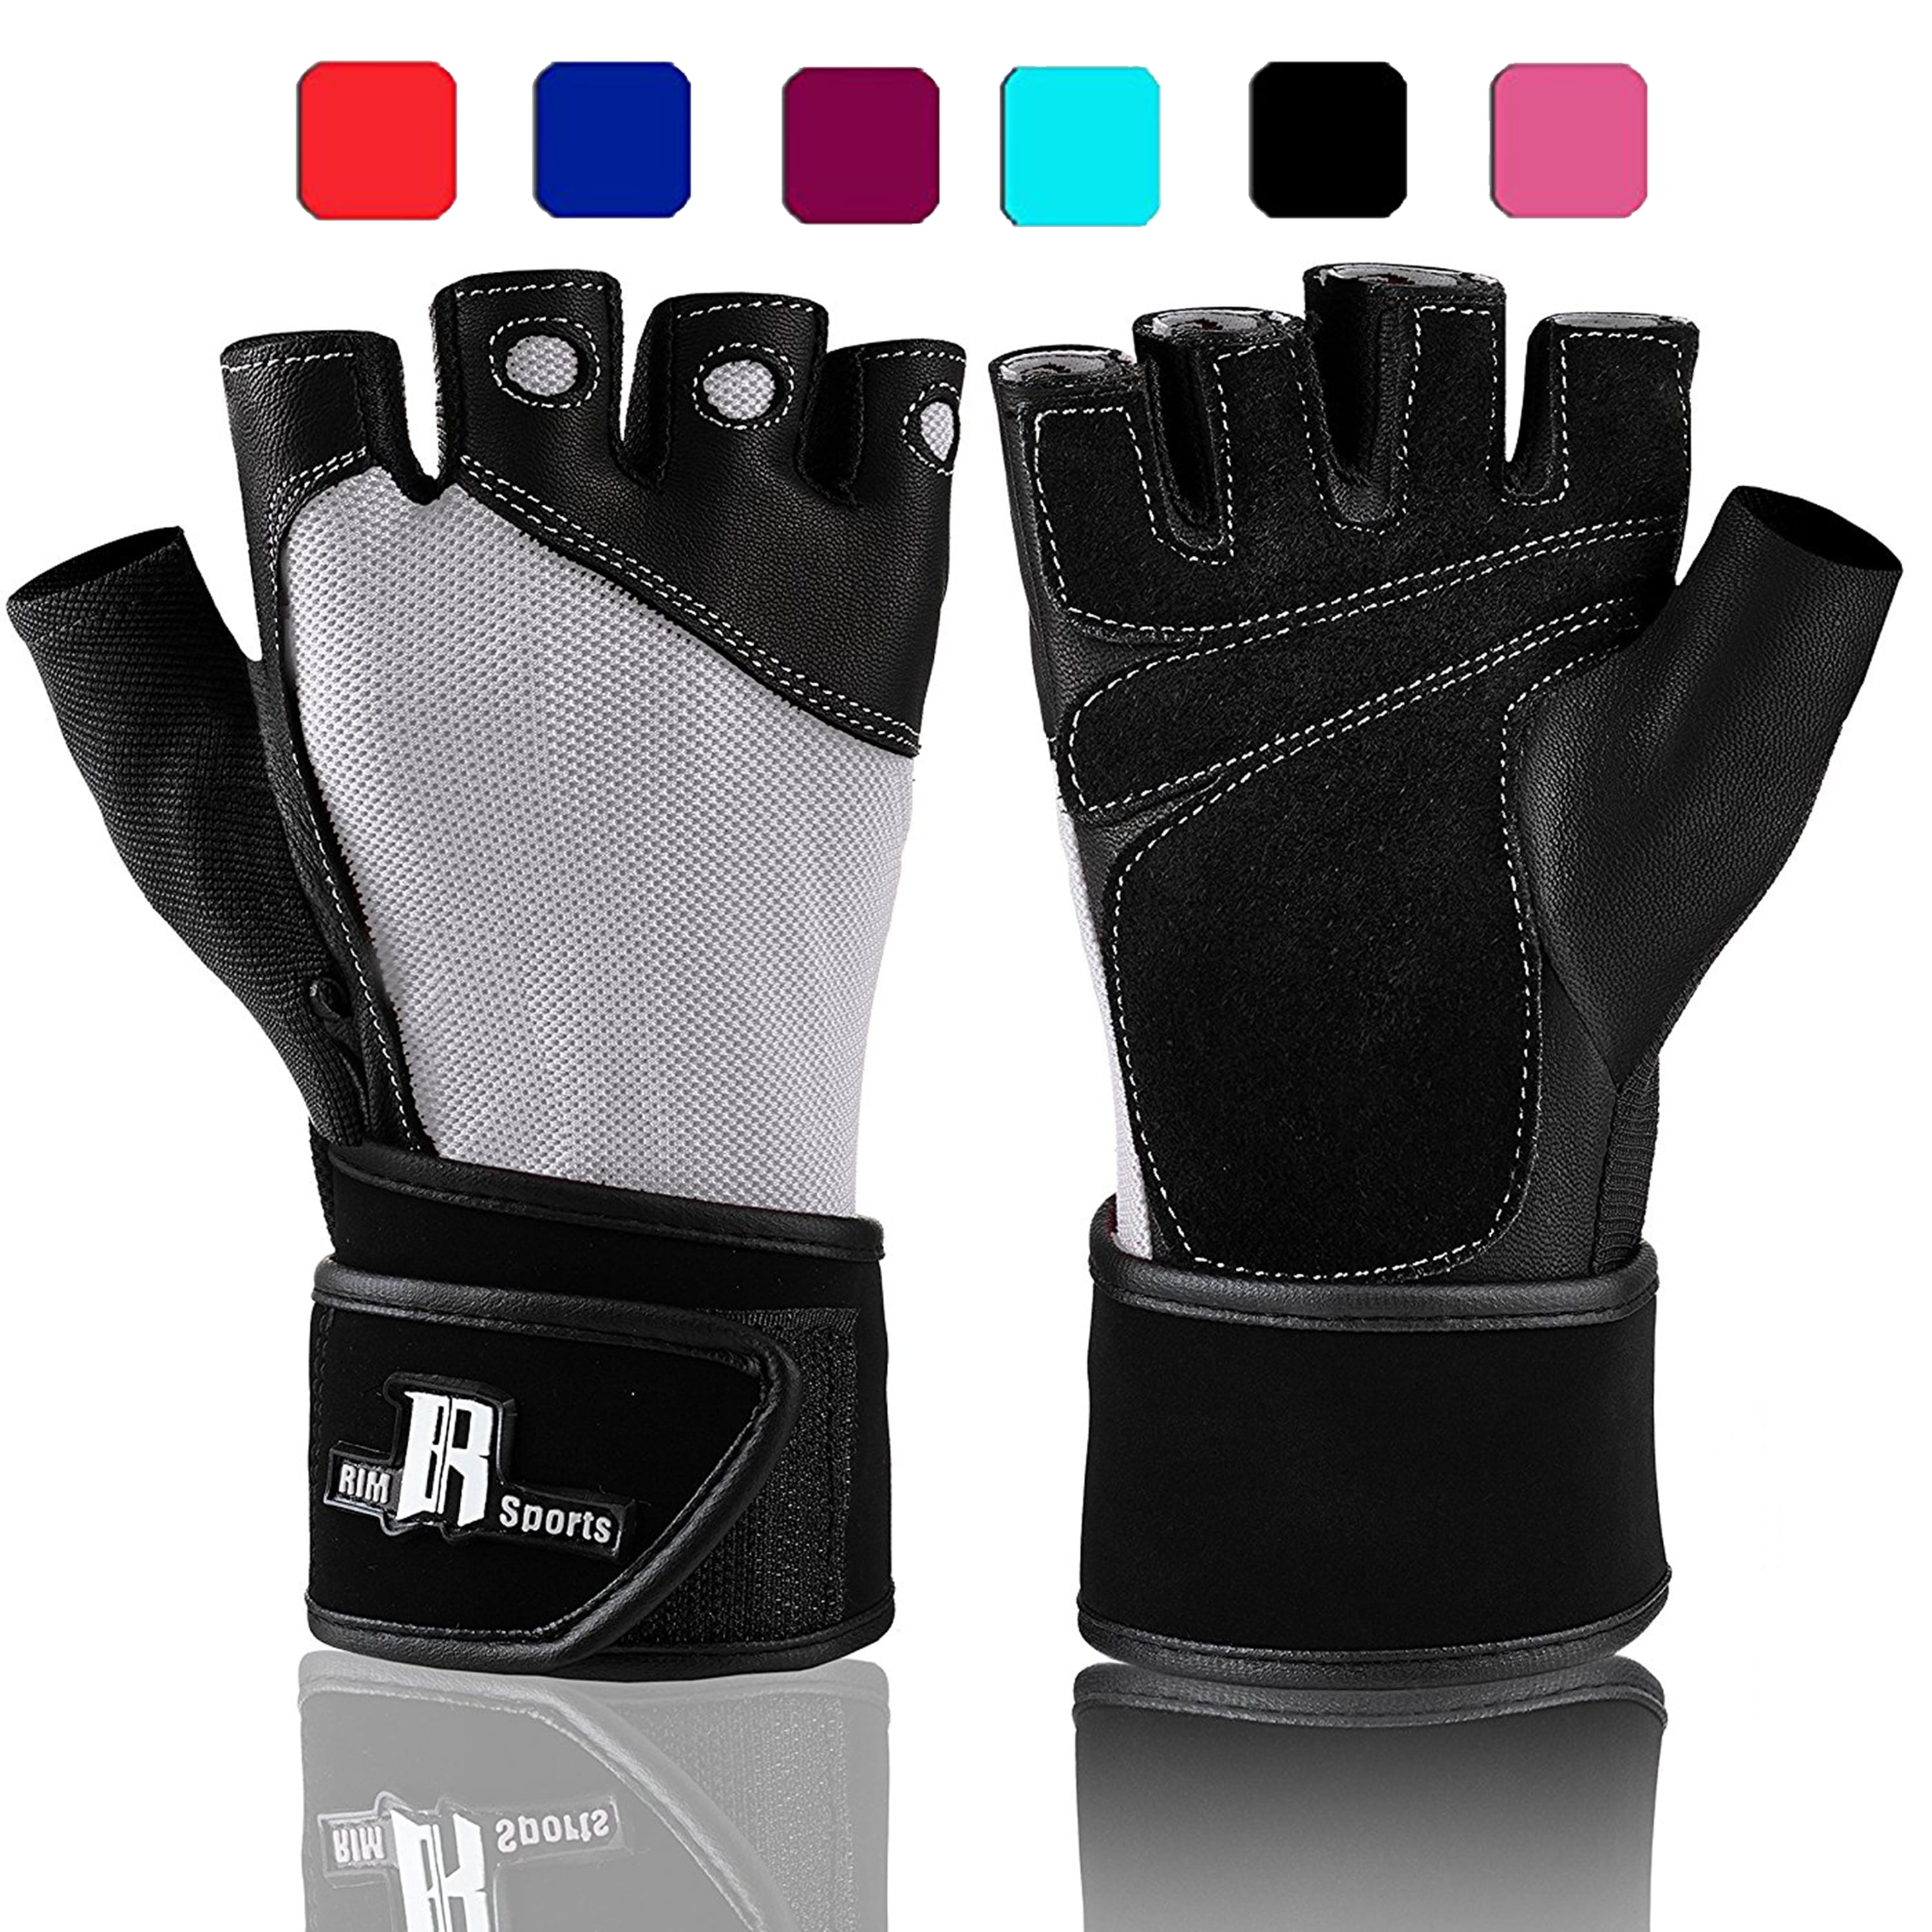 Weight Lifting Gloves Gym Workout Fitness Training Wrist Support CLEARANCE!